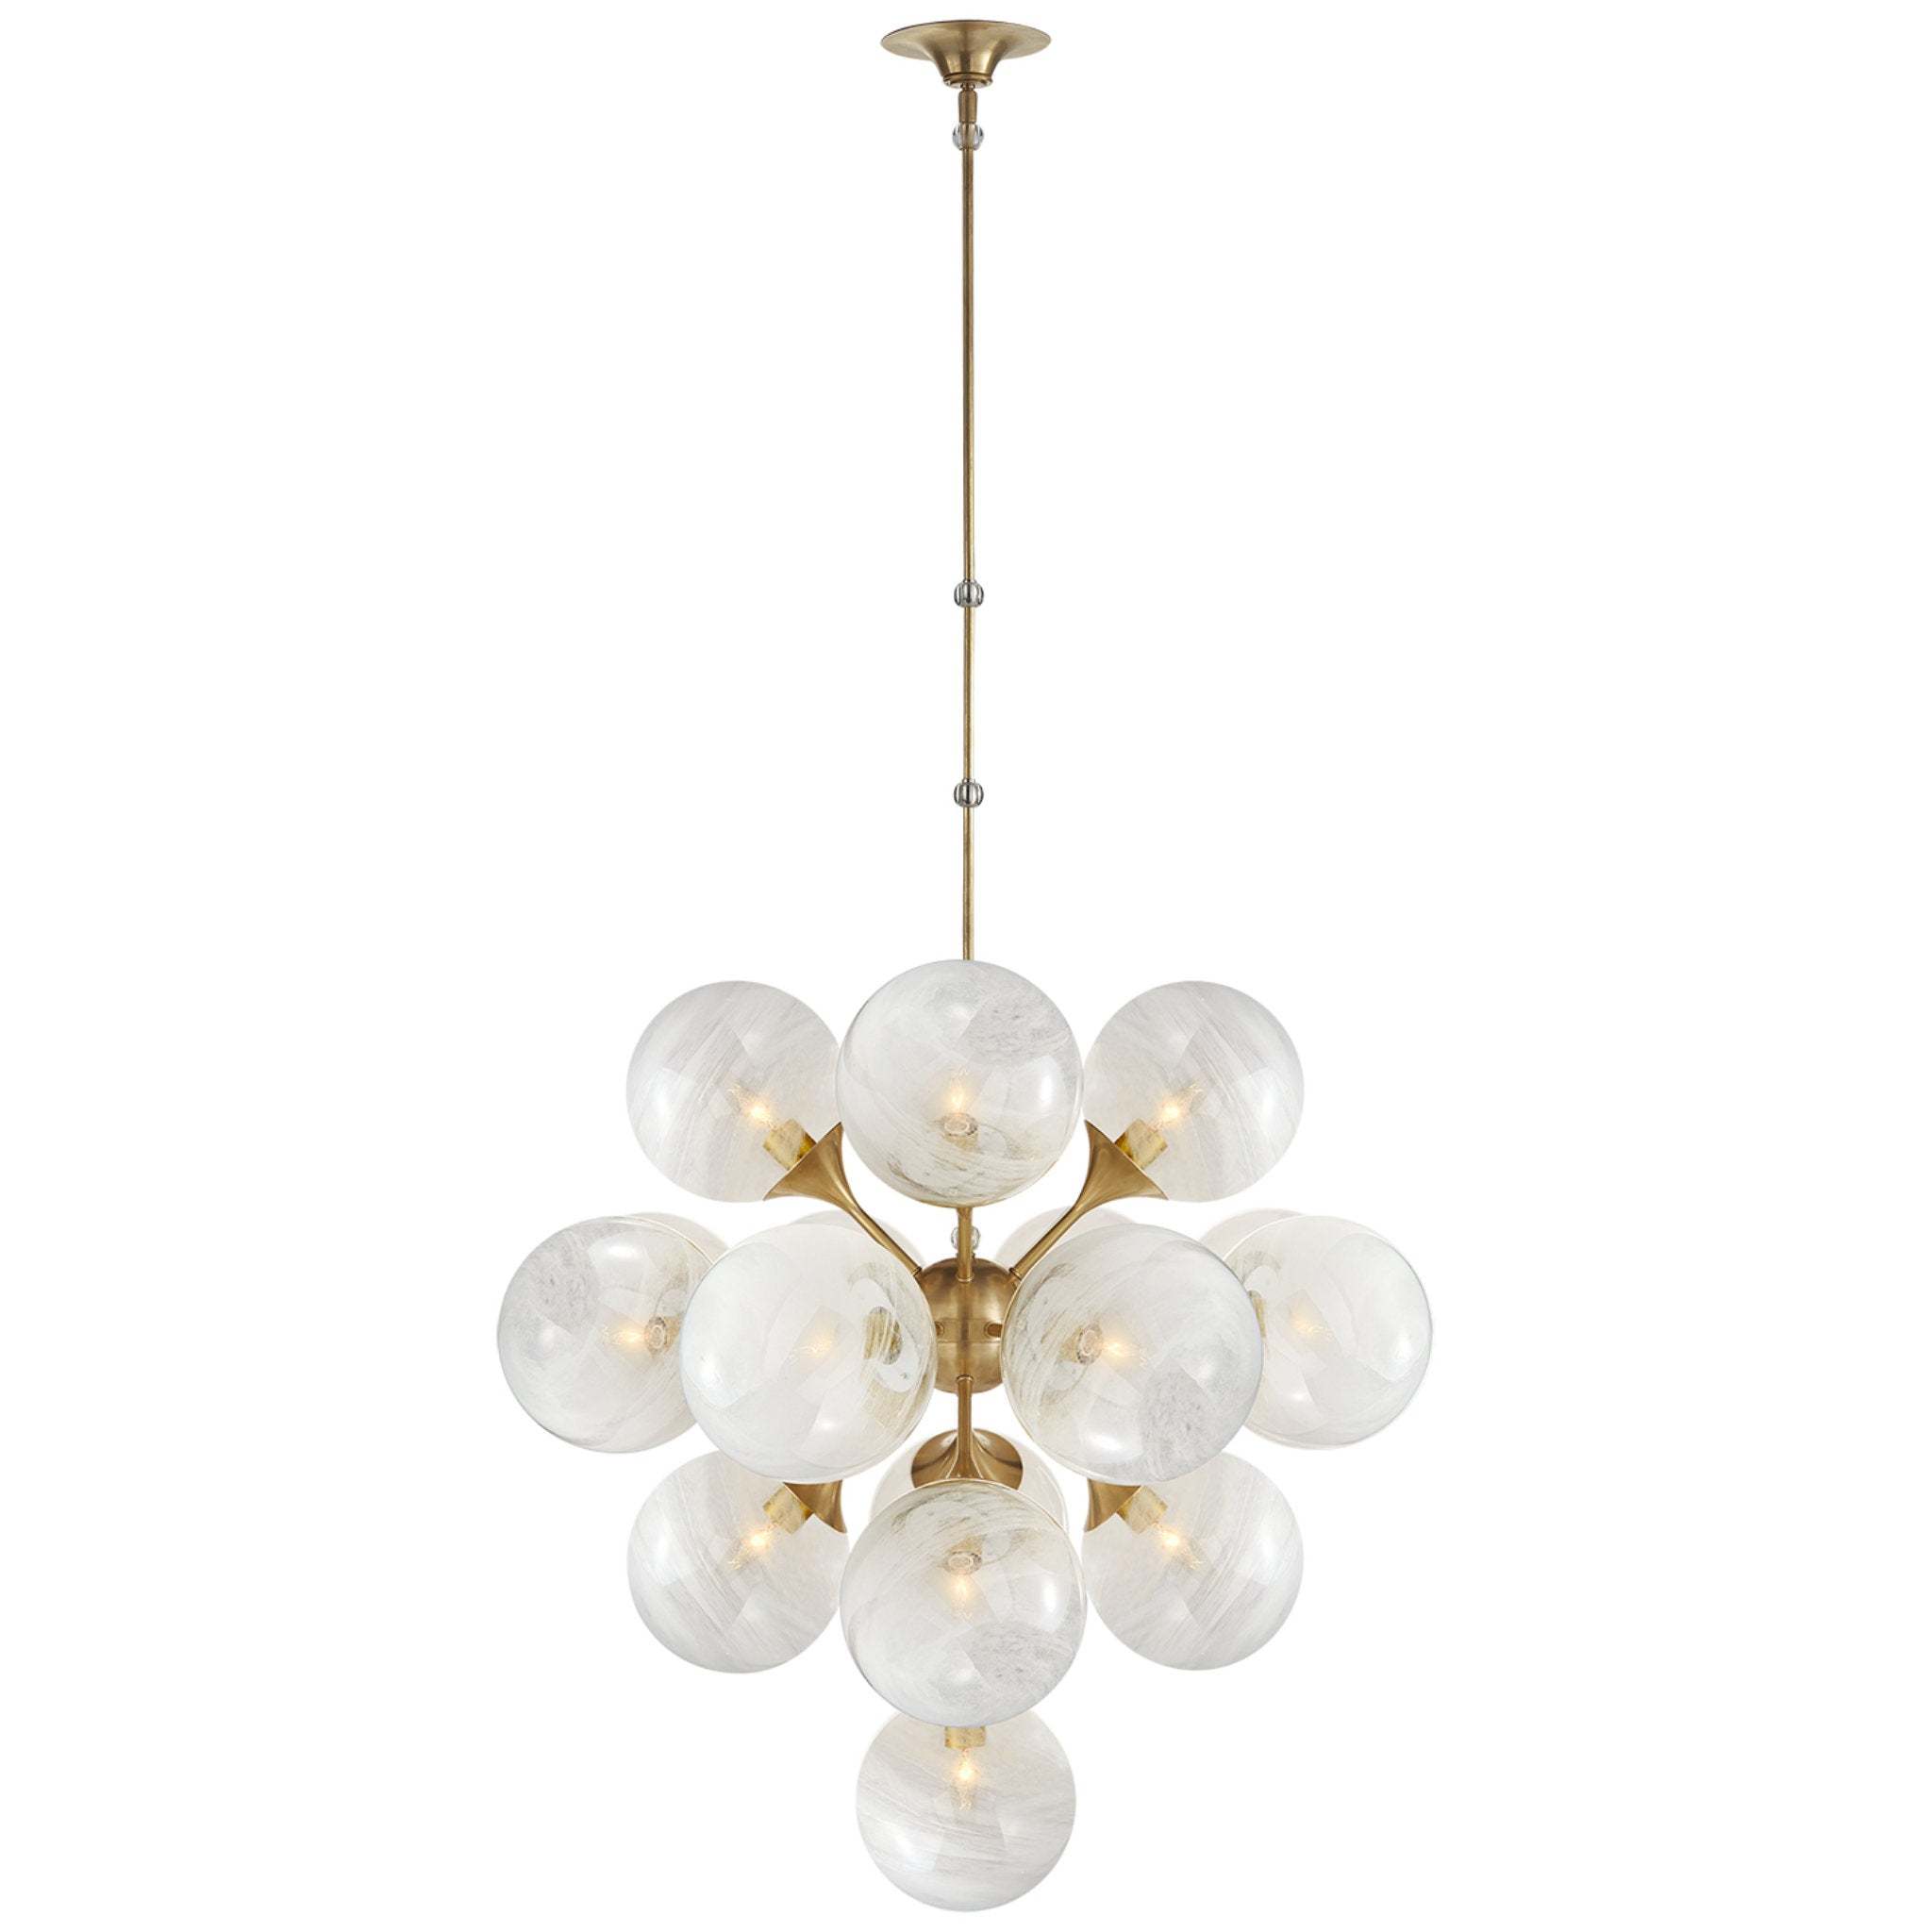 AERIN Cristol Large Tiered Chandelier in Hand-Rubbed Antique Brass with White Strie Glass